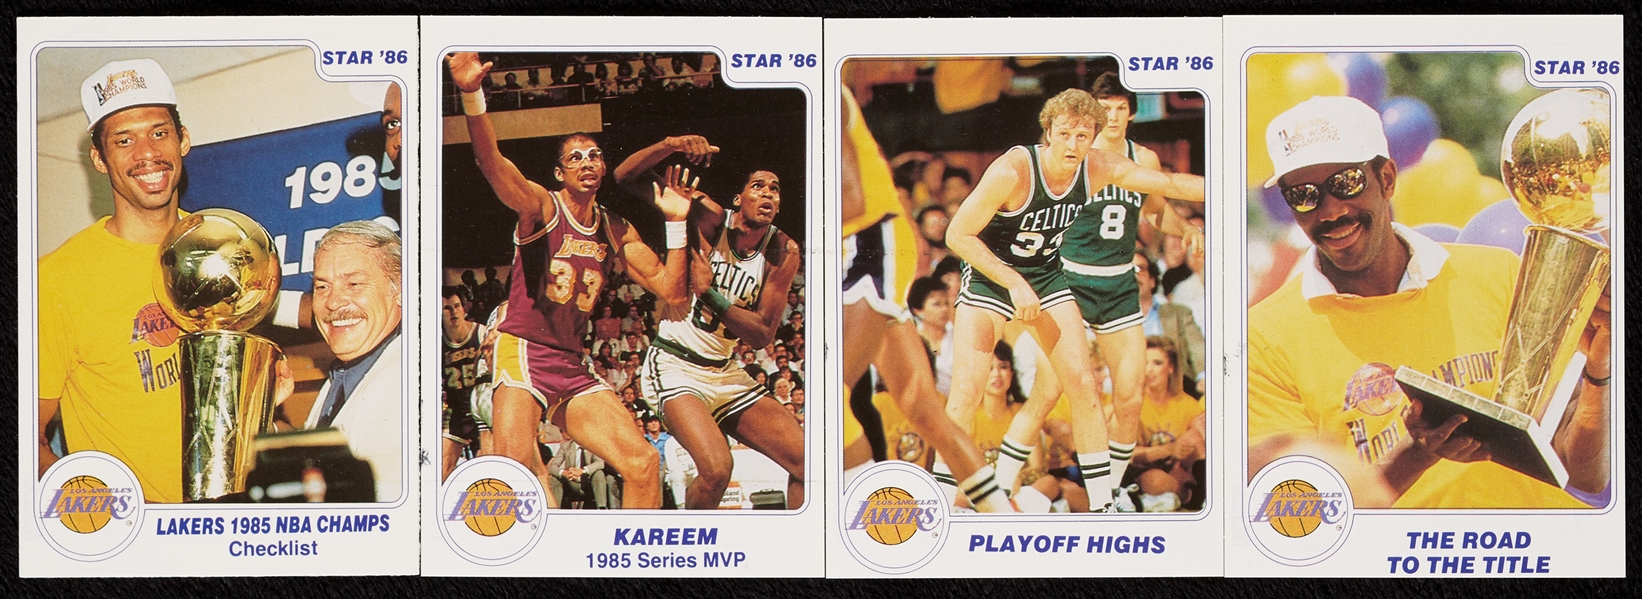 1986 Star Co. Lakers NBA Champions Complete Set (18)